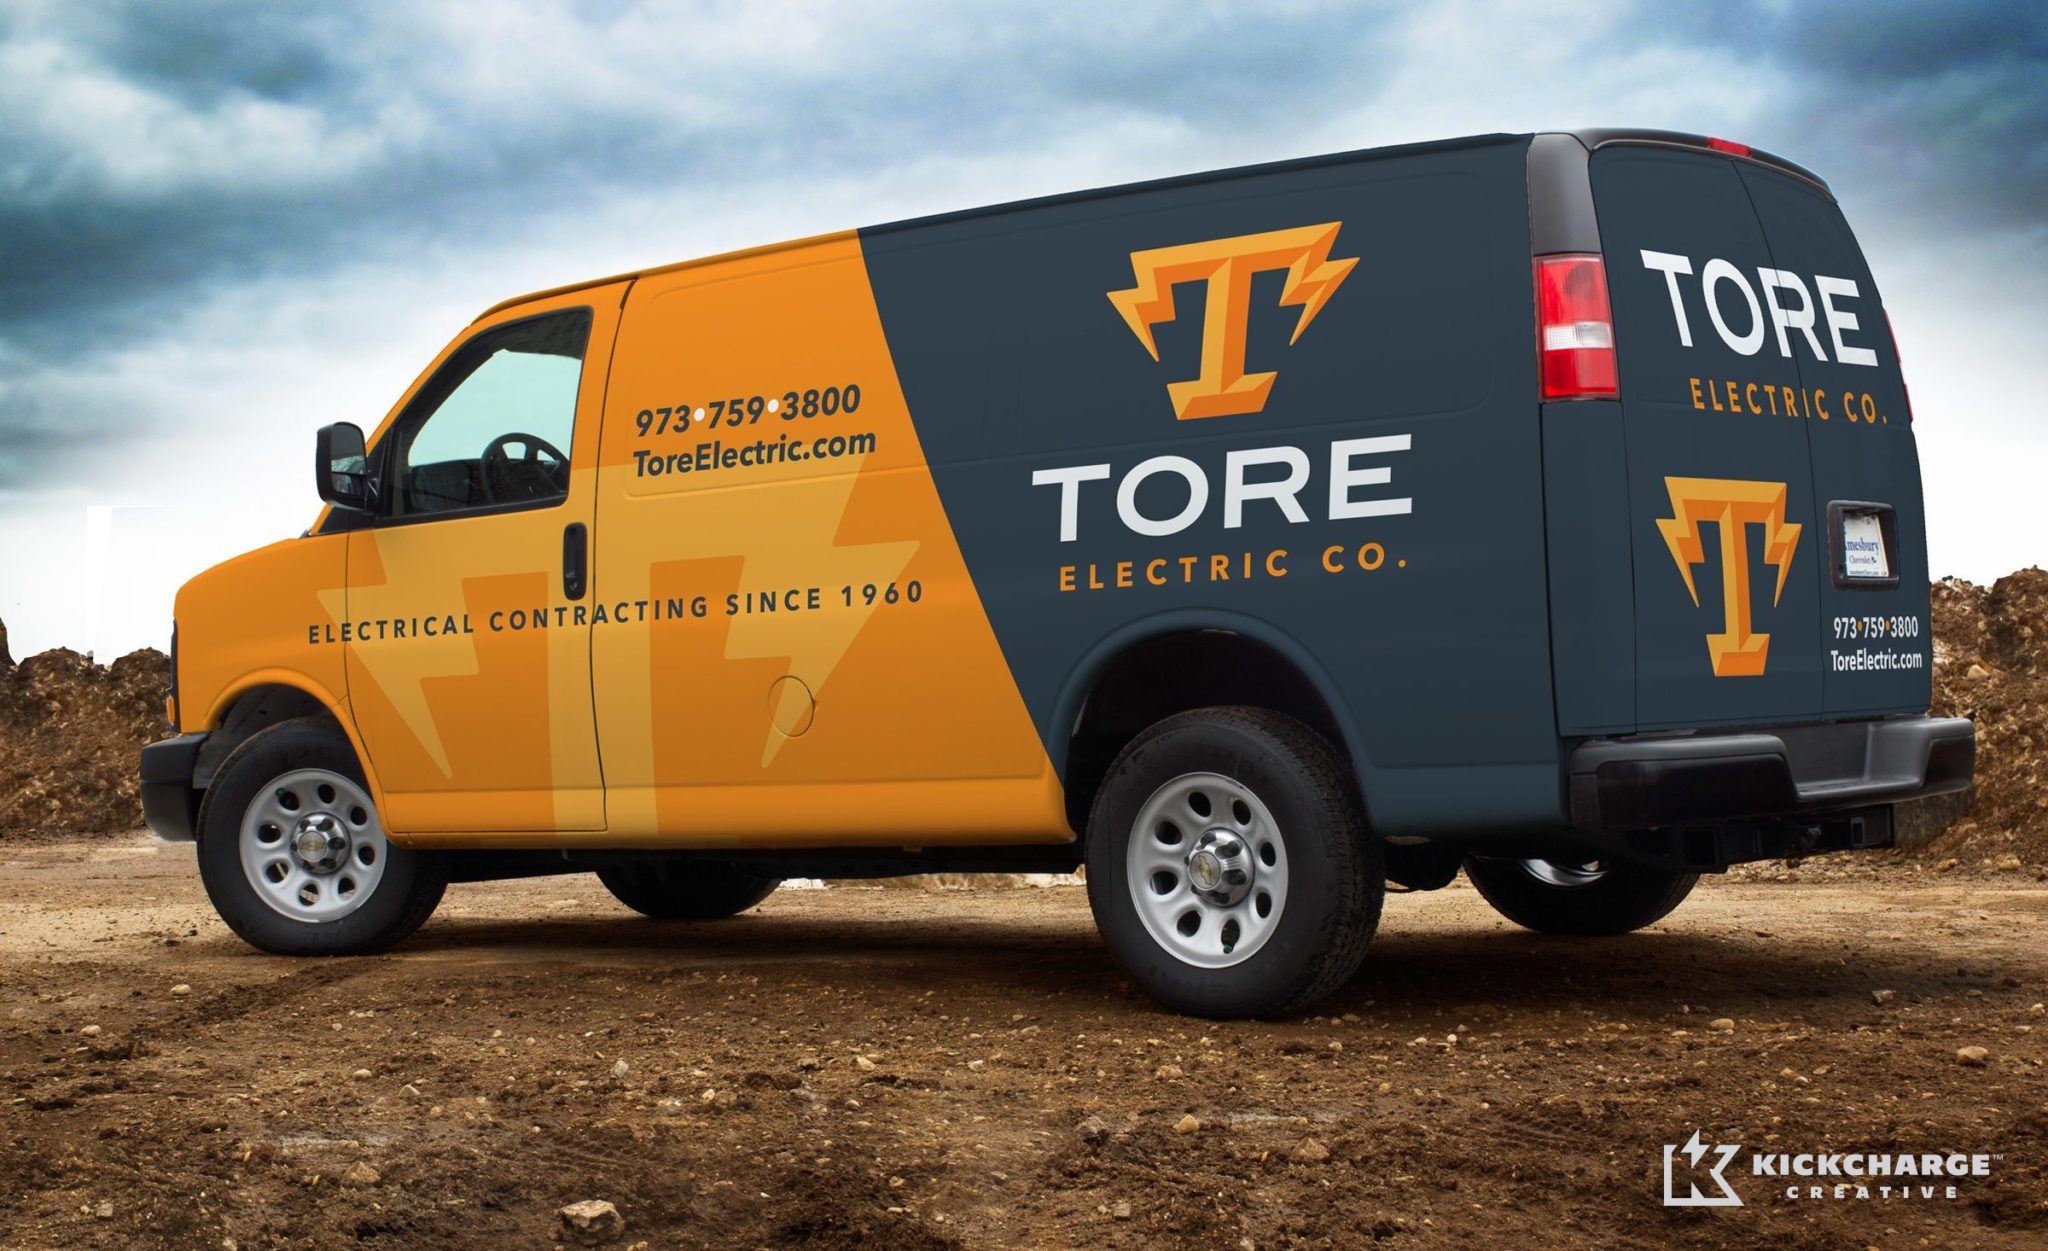 This eye-catching vehicle wrap for Tore Electric Co. makes a statement as it rolls through New Jersey. After all, the best vehicle wraps use simple, easy-to-read graphics.